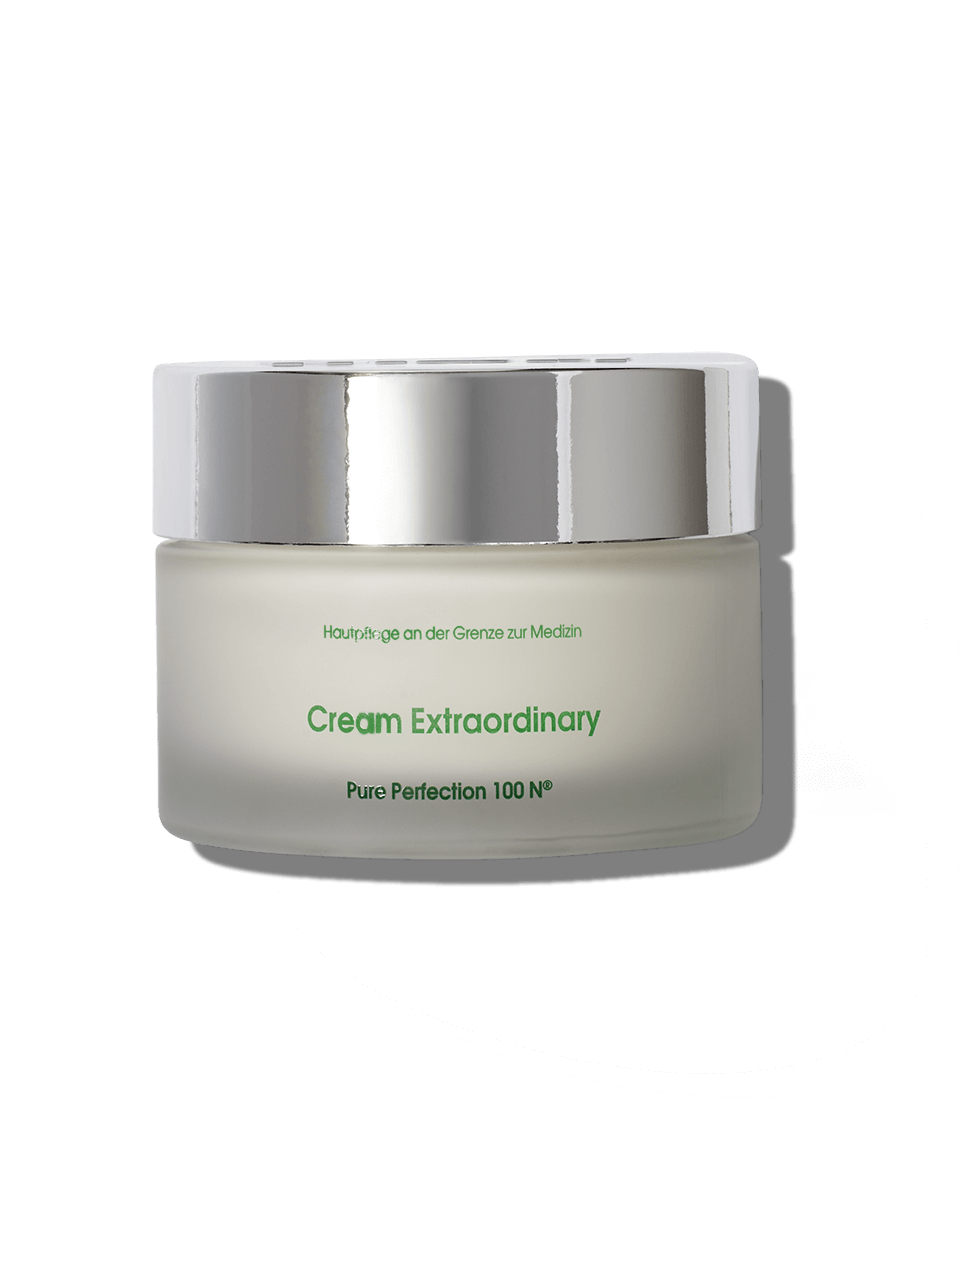 Cream Extraordinary SKINCARE MBR Medical Beauty Research 